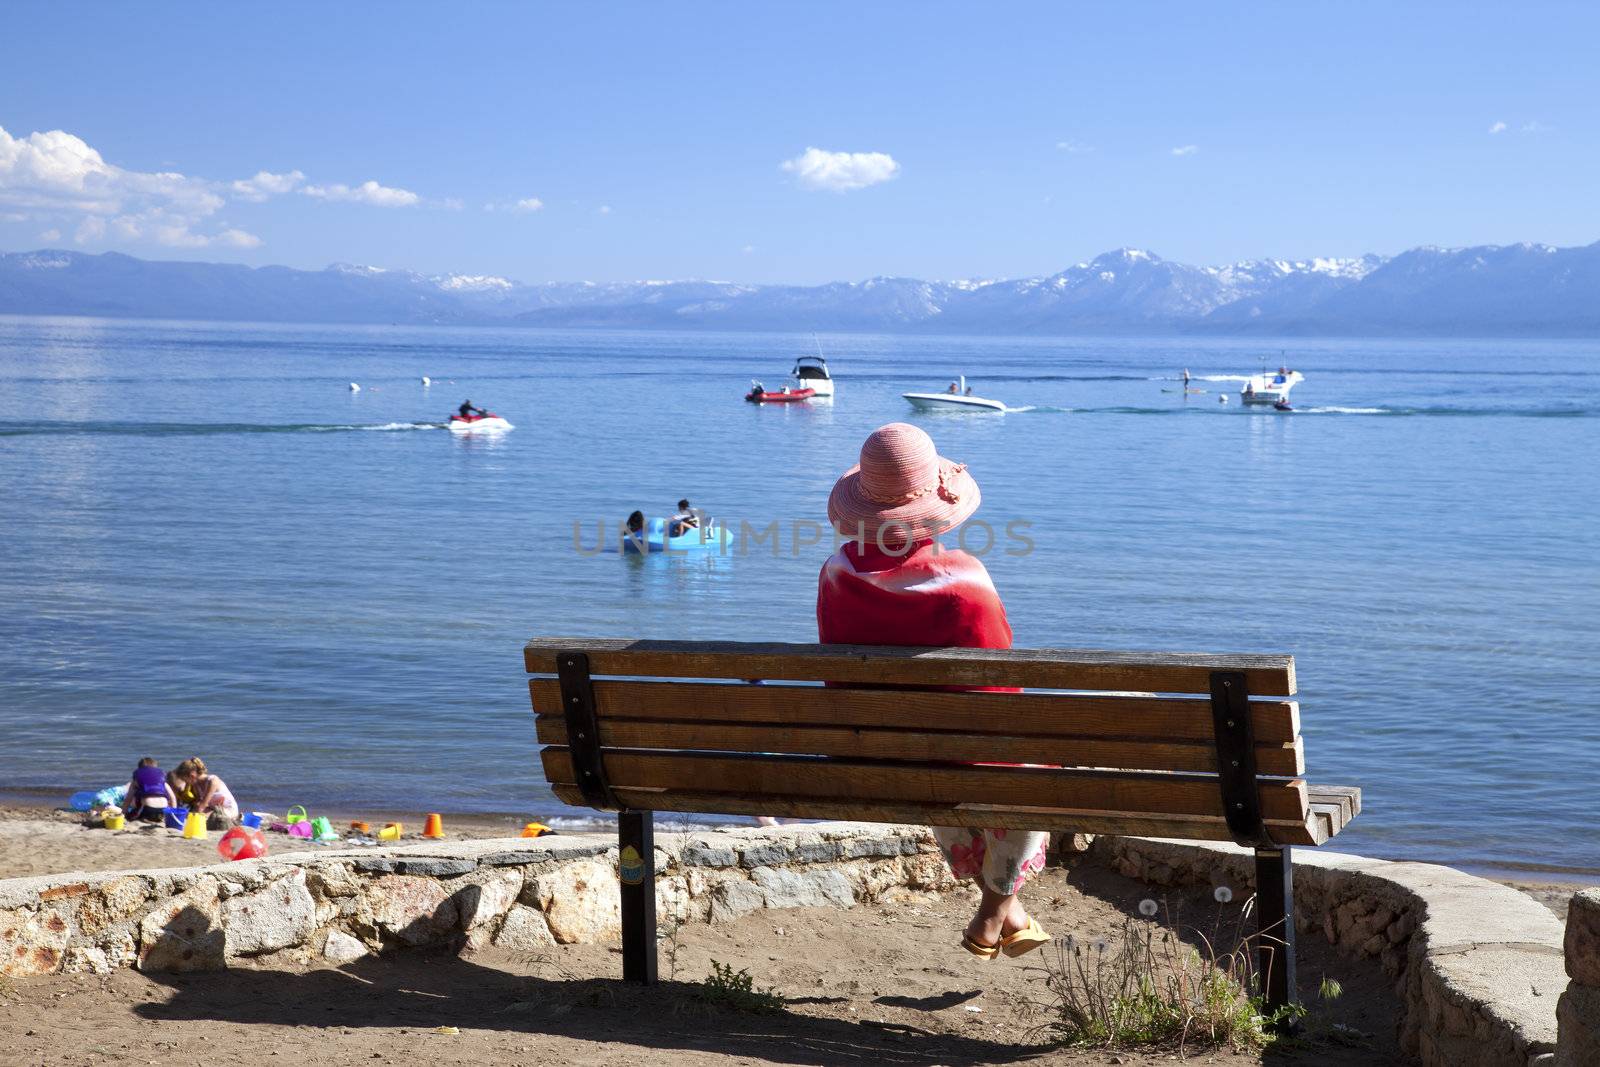 Activities and leisure on the beach and lake, Lake Tahoe CA.